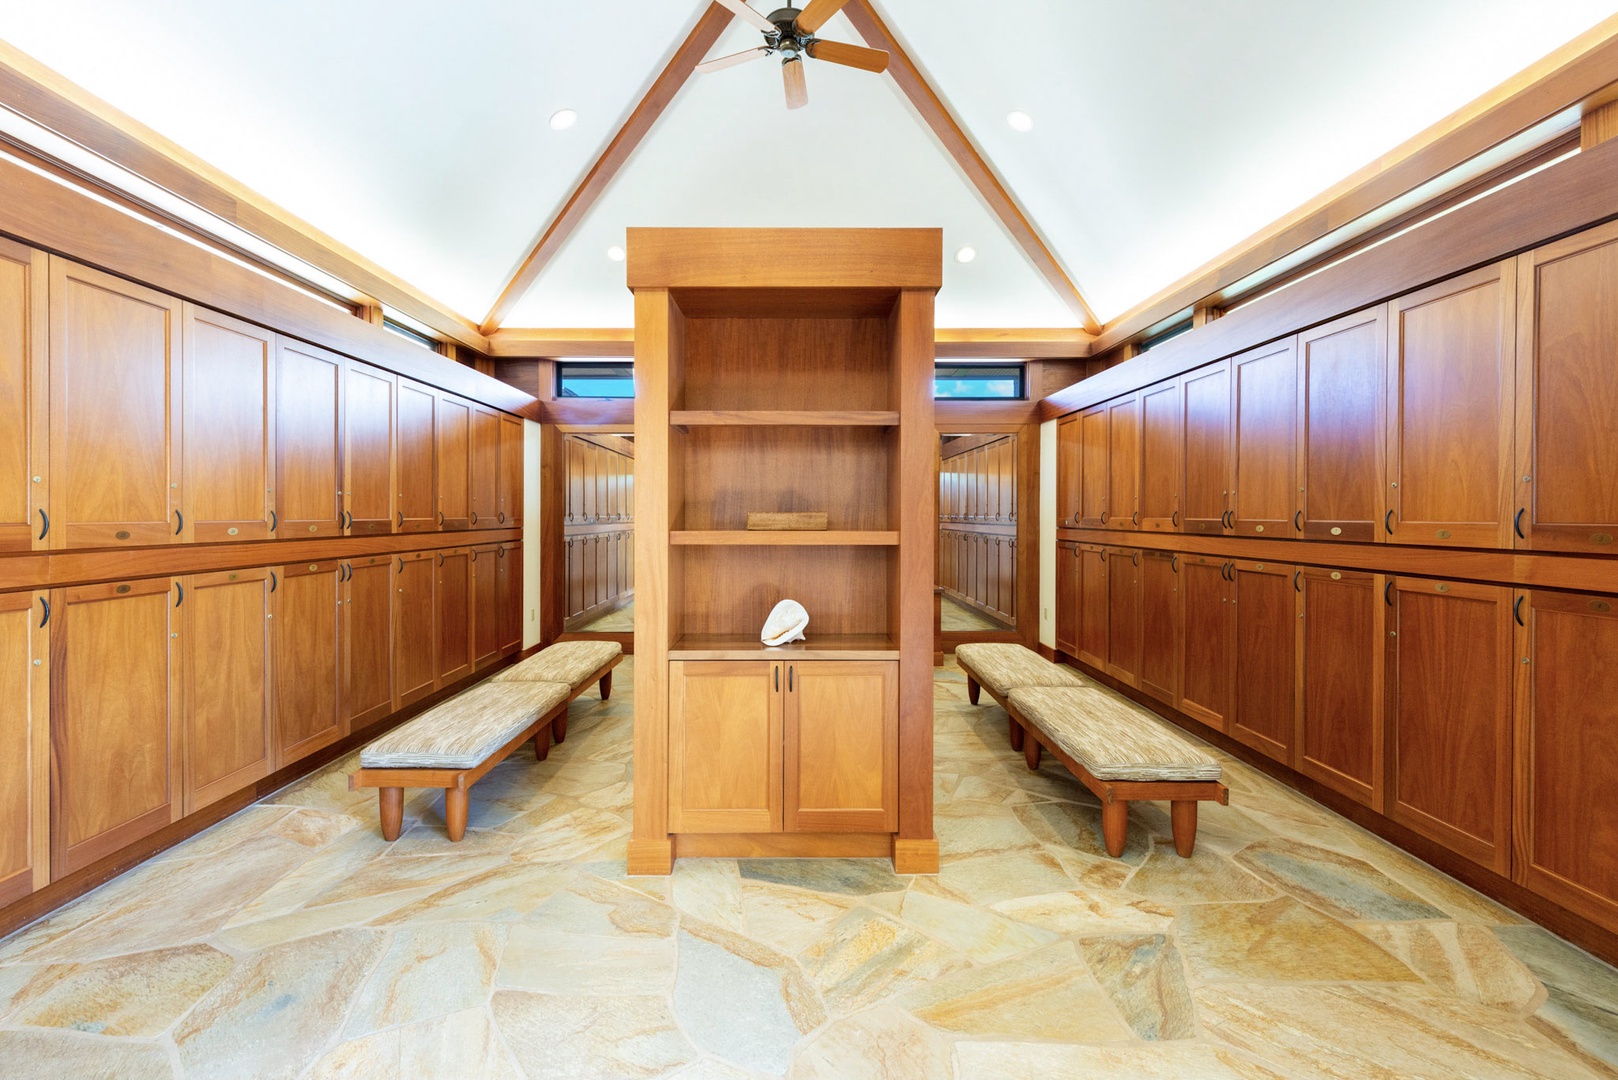 Kamuela Vacation Rentals, 3BD Na Hale 3 at Pauoa Beach Club at Mauna Lani Resort - Pauoa Beach Club Amenities Center features immaculately maintained men and women’s locker rooms